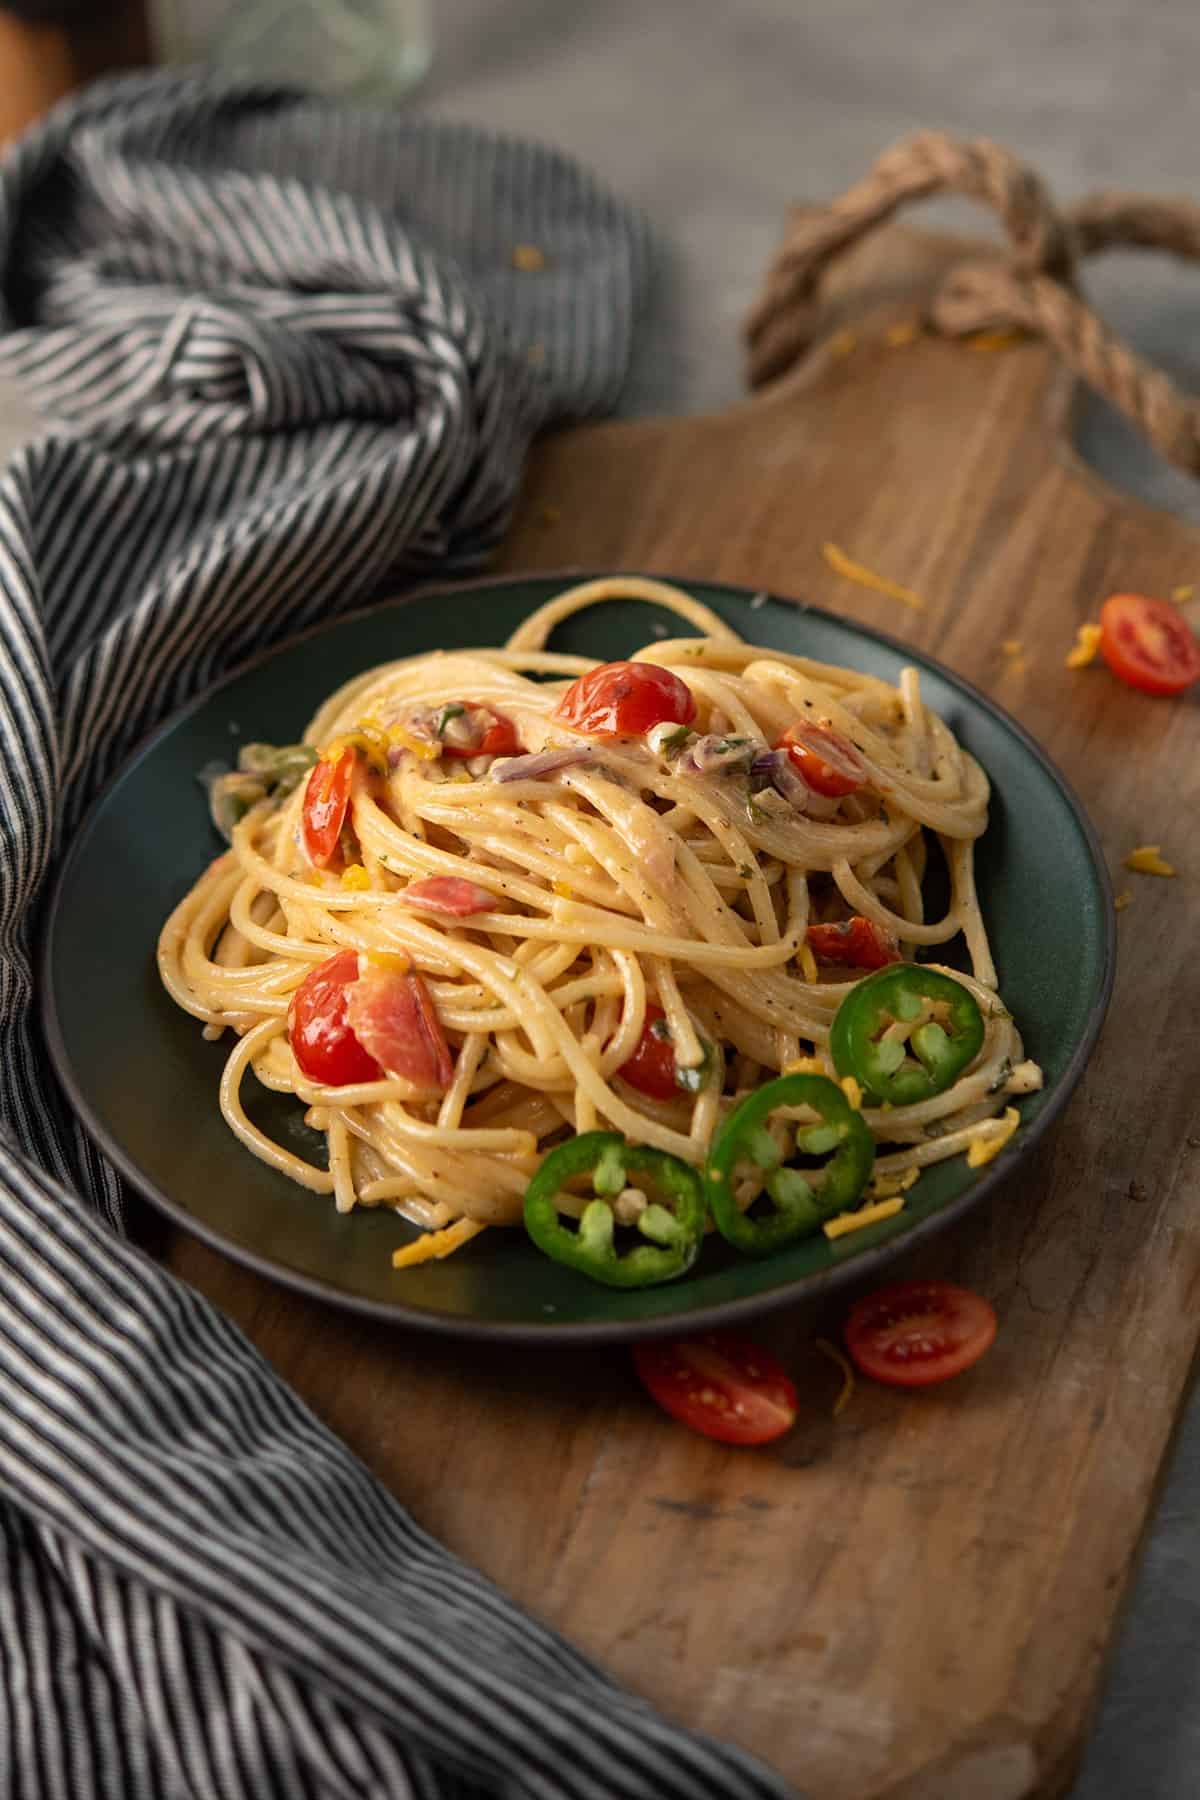 best spicy spaghetti flavored with jalapeno peppers